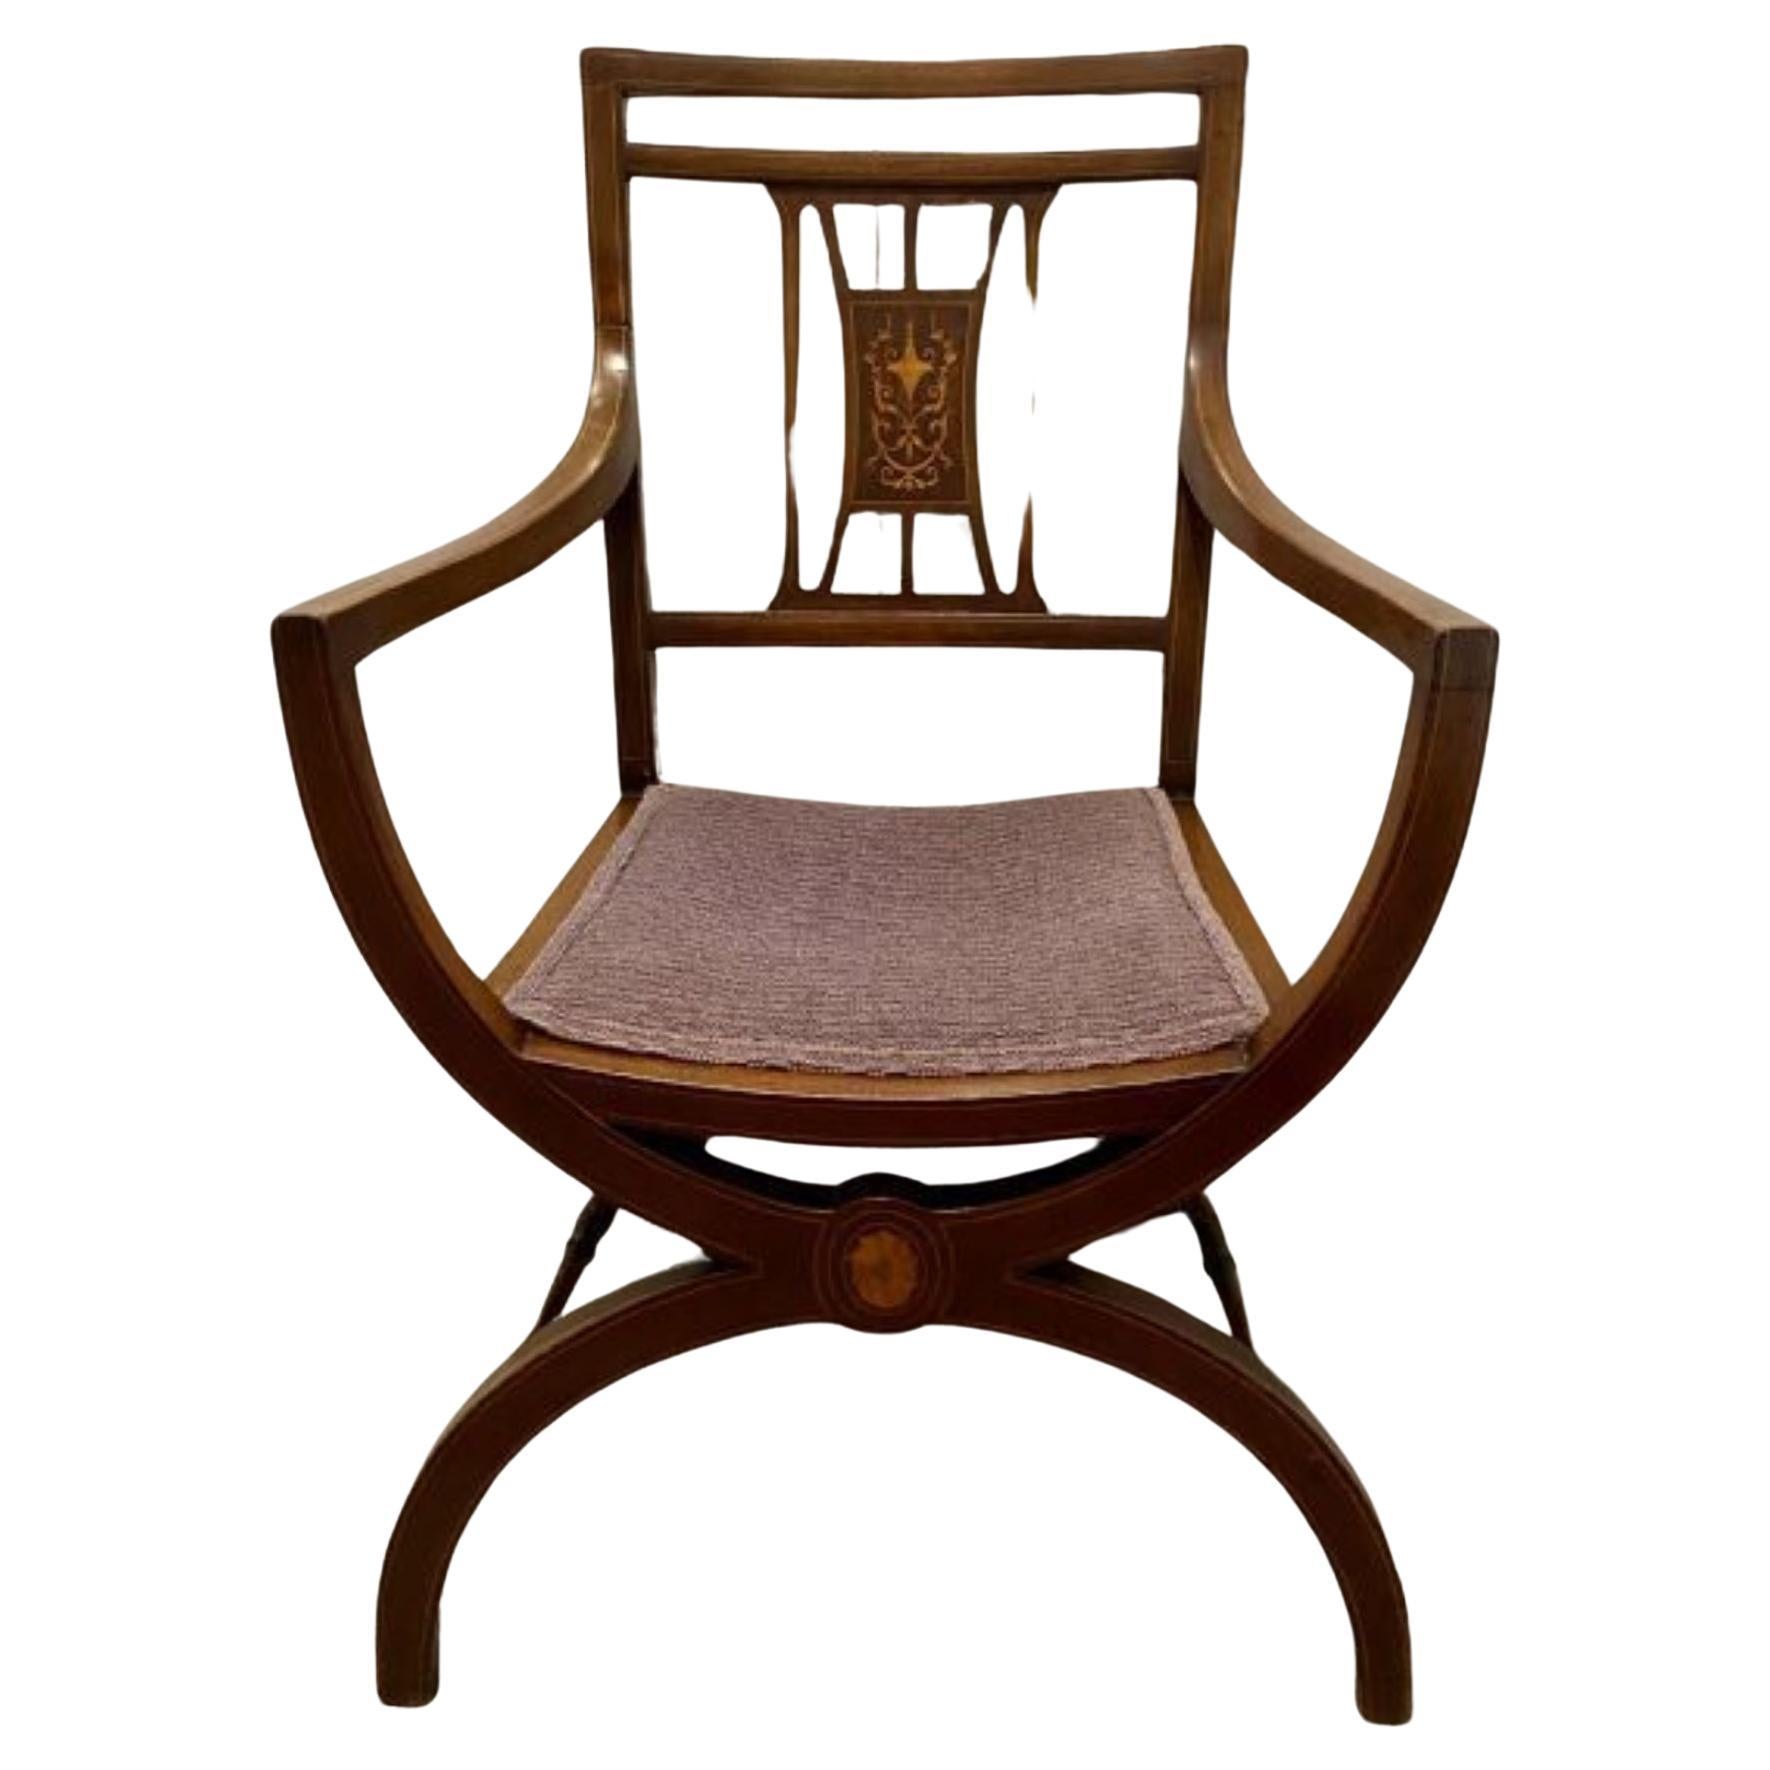 Unusual Antique Edwardian Quality Mahogany Inlaid Armchair For Sale